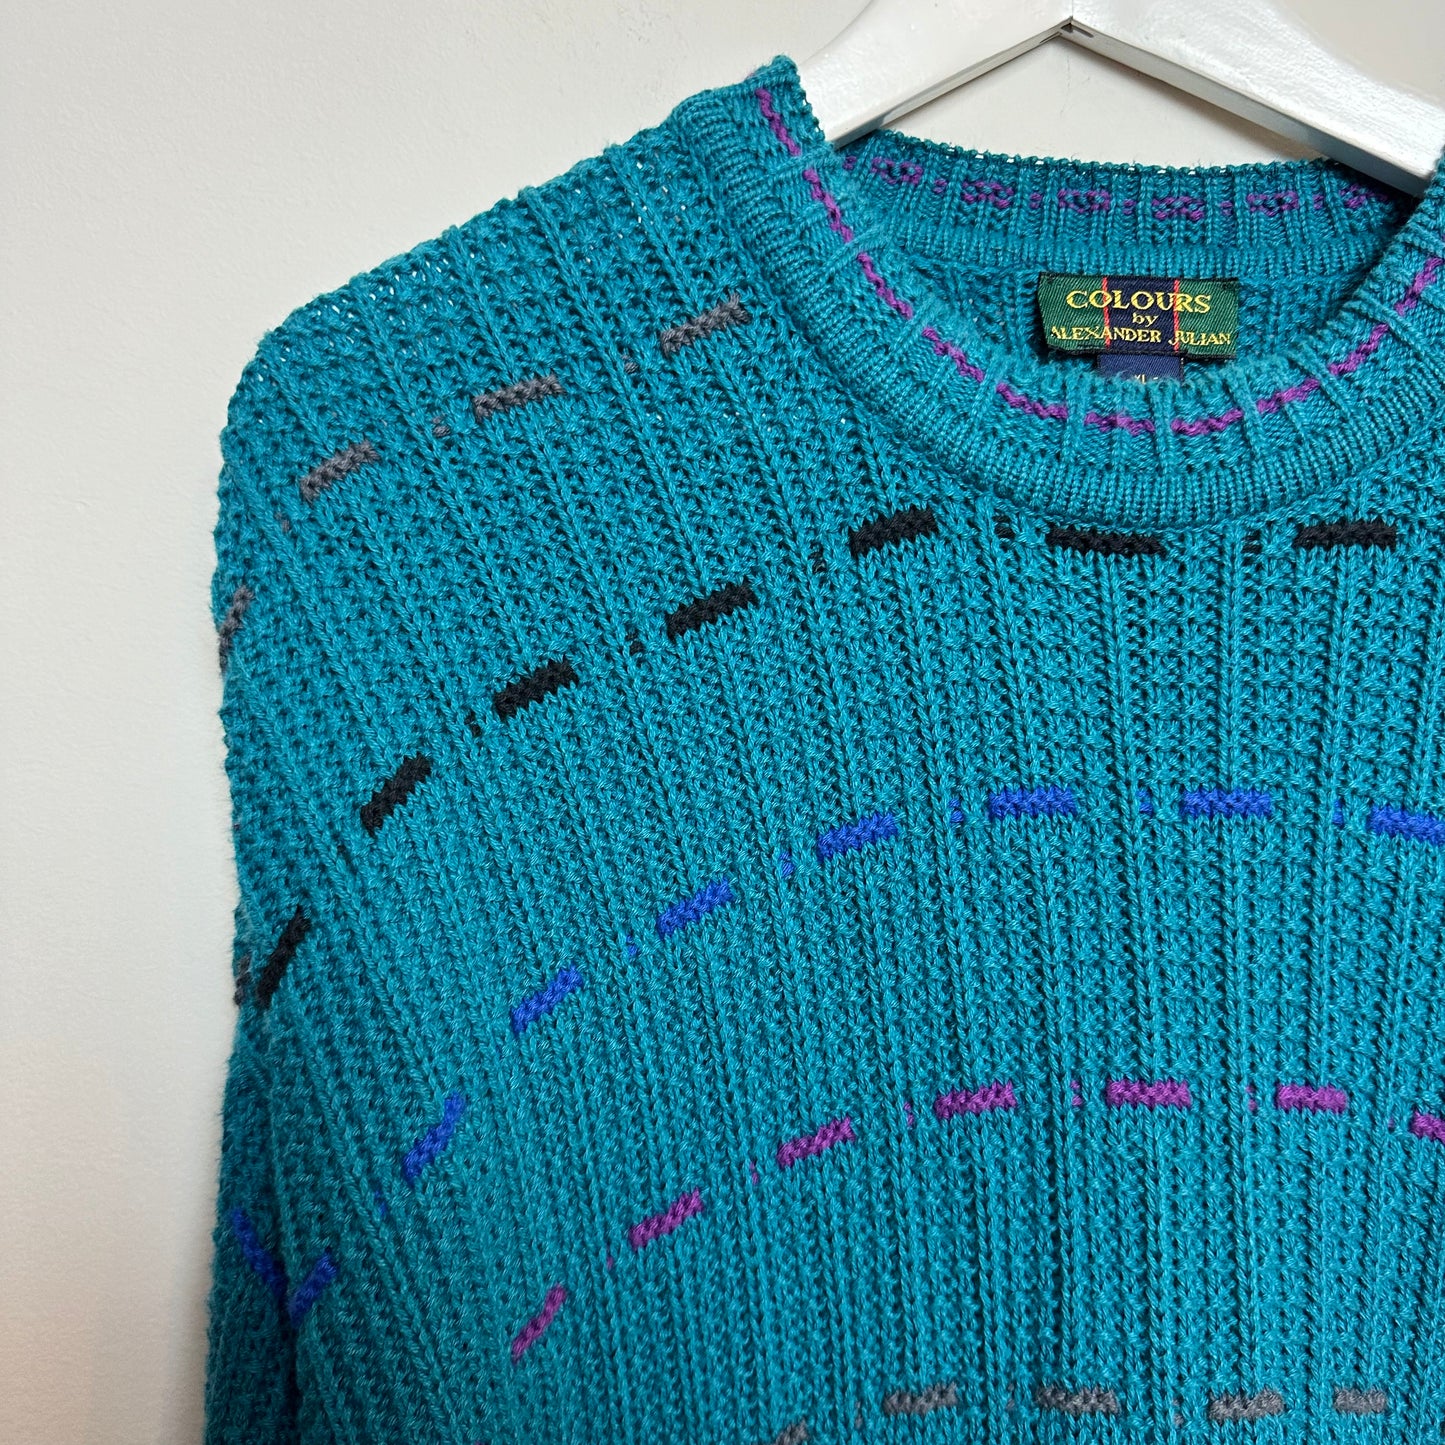 Vintage 90s Colours by Alexander Julian Chunky Knit Grandpa Sweater Crewneck Teal XL